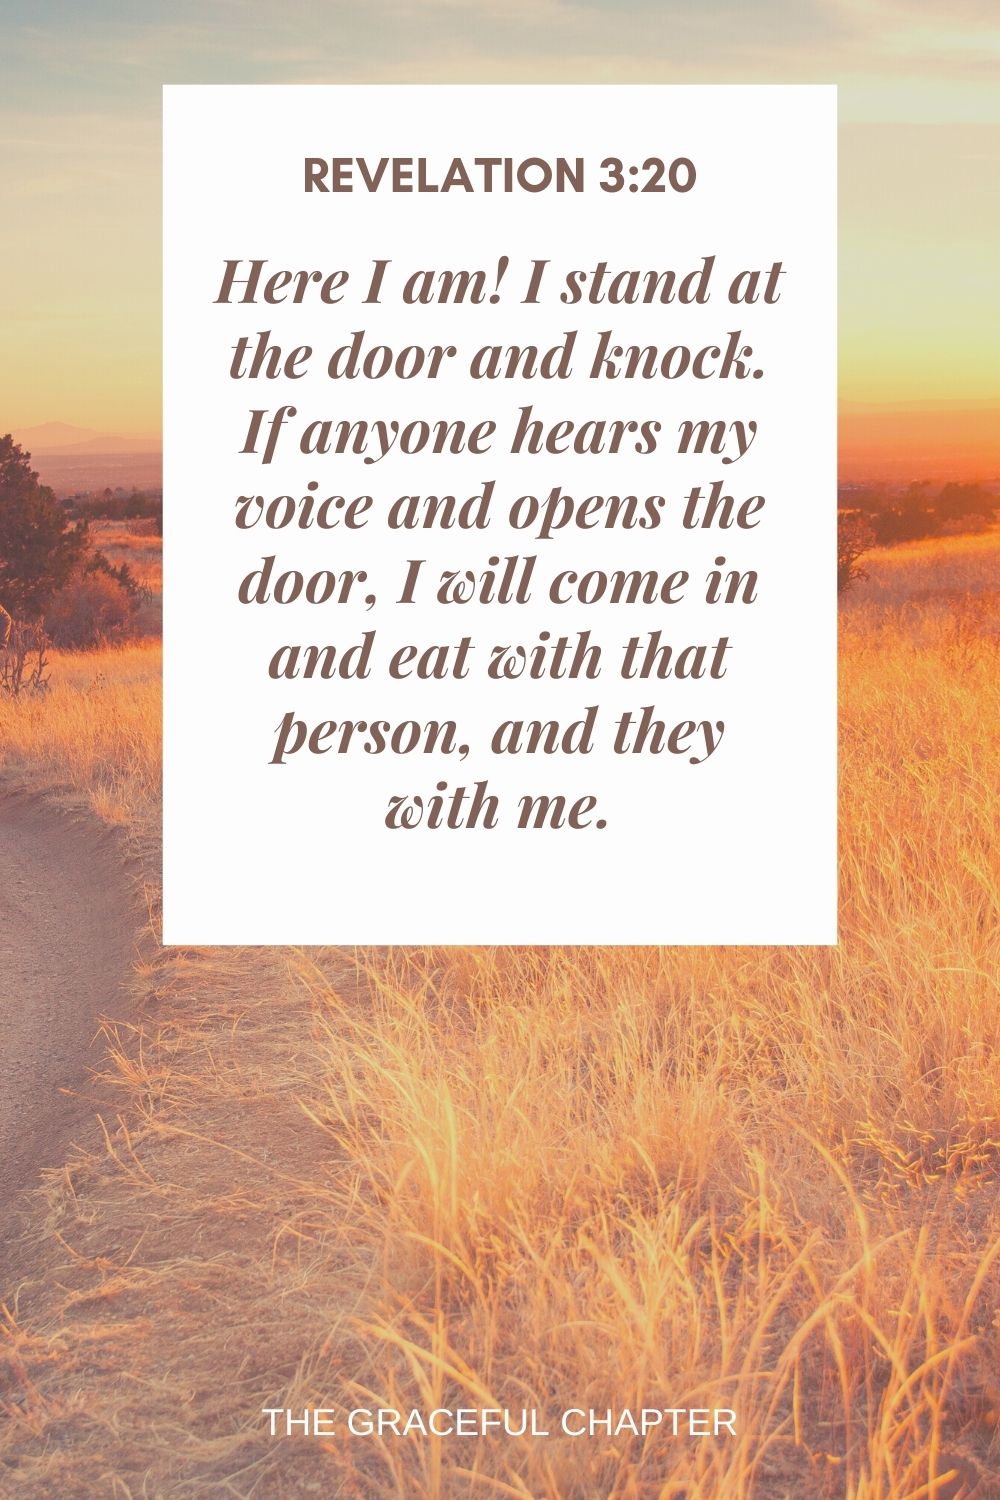 Here I am! I stand at the door and knock. If anyone hears my voice and opens the door, I will come in and eat with that person, and they with me. Revelation 3:20